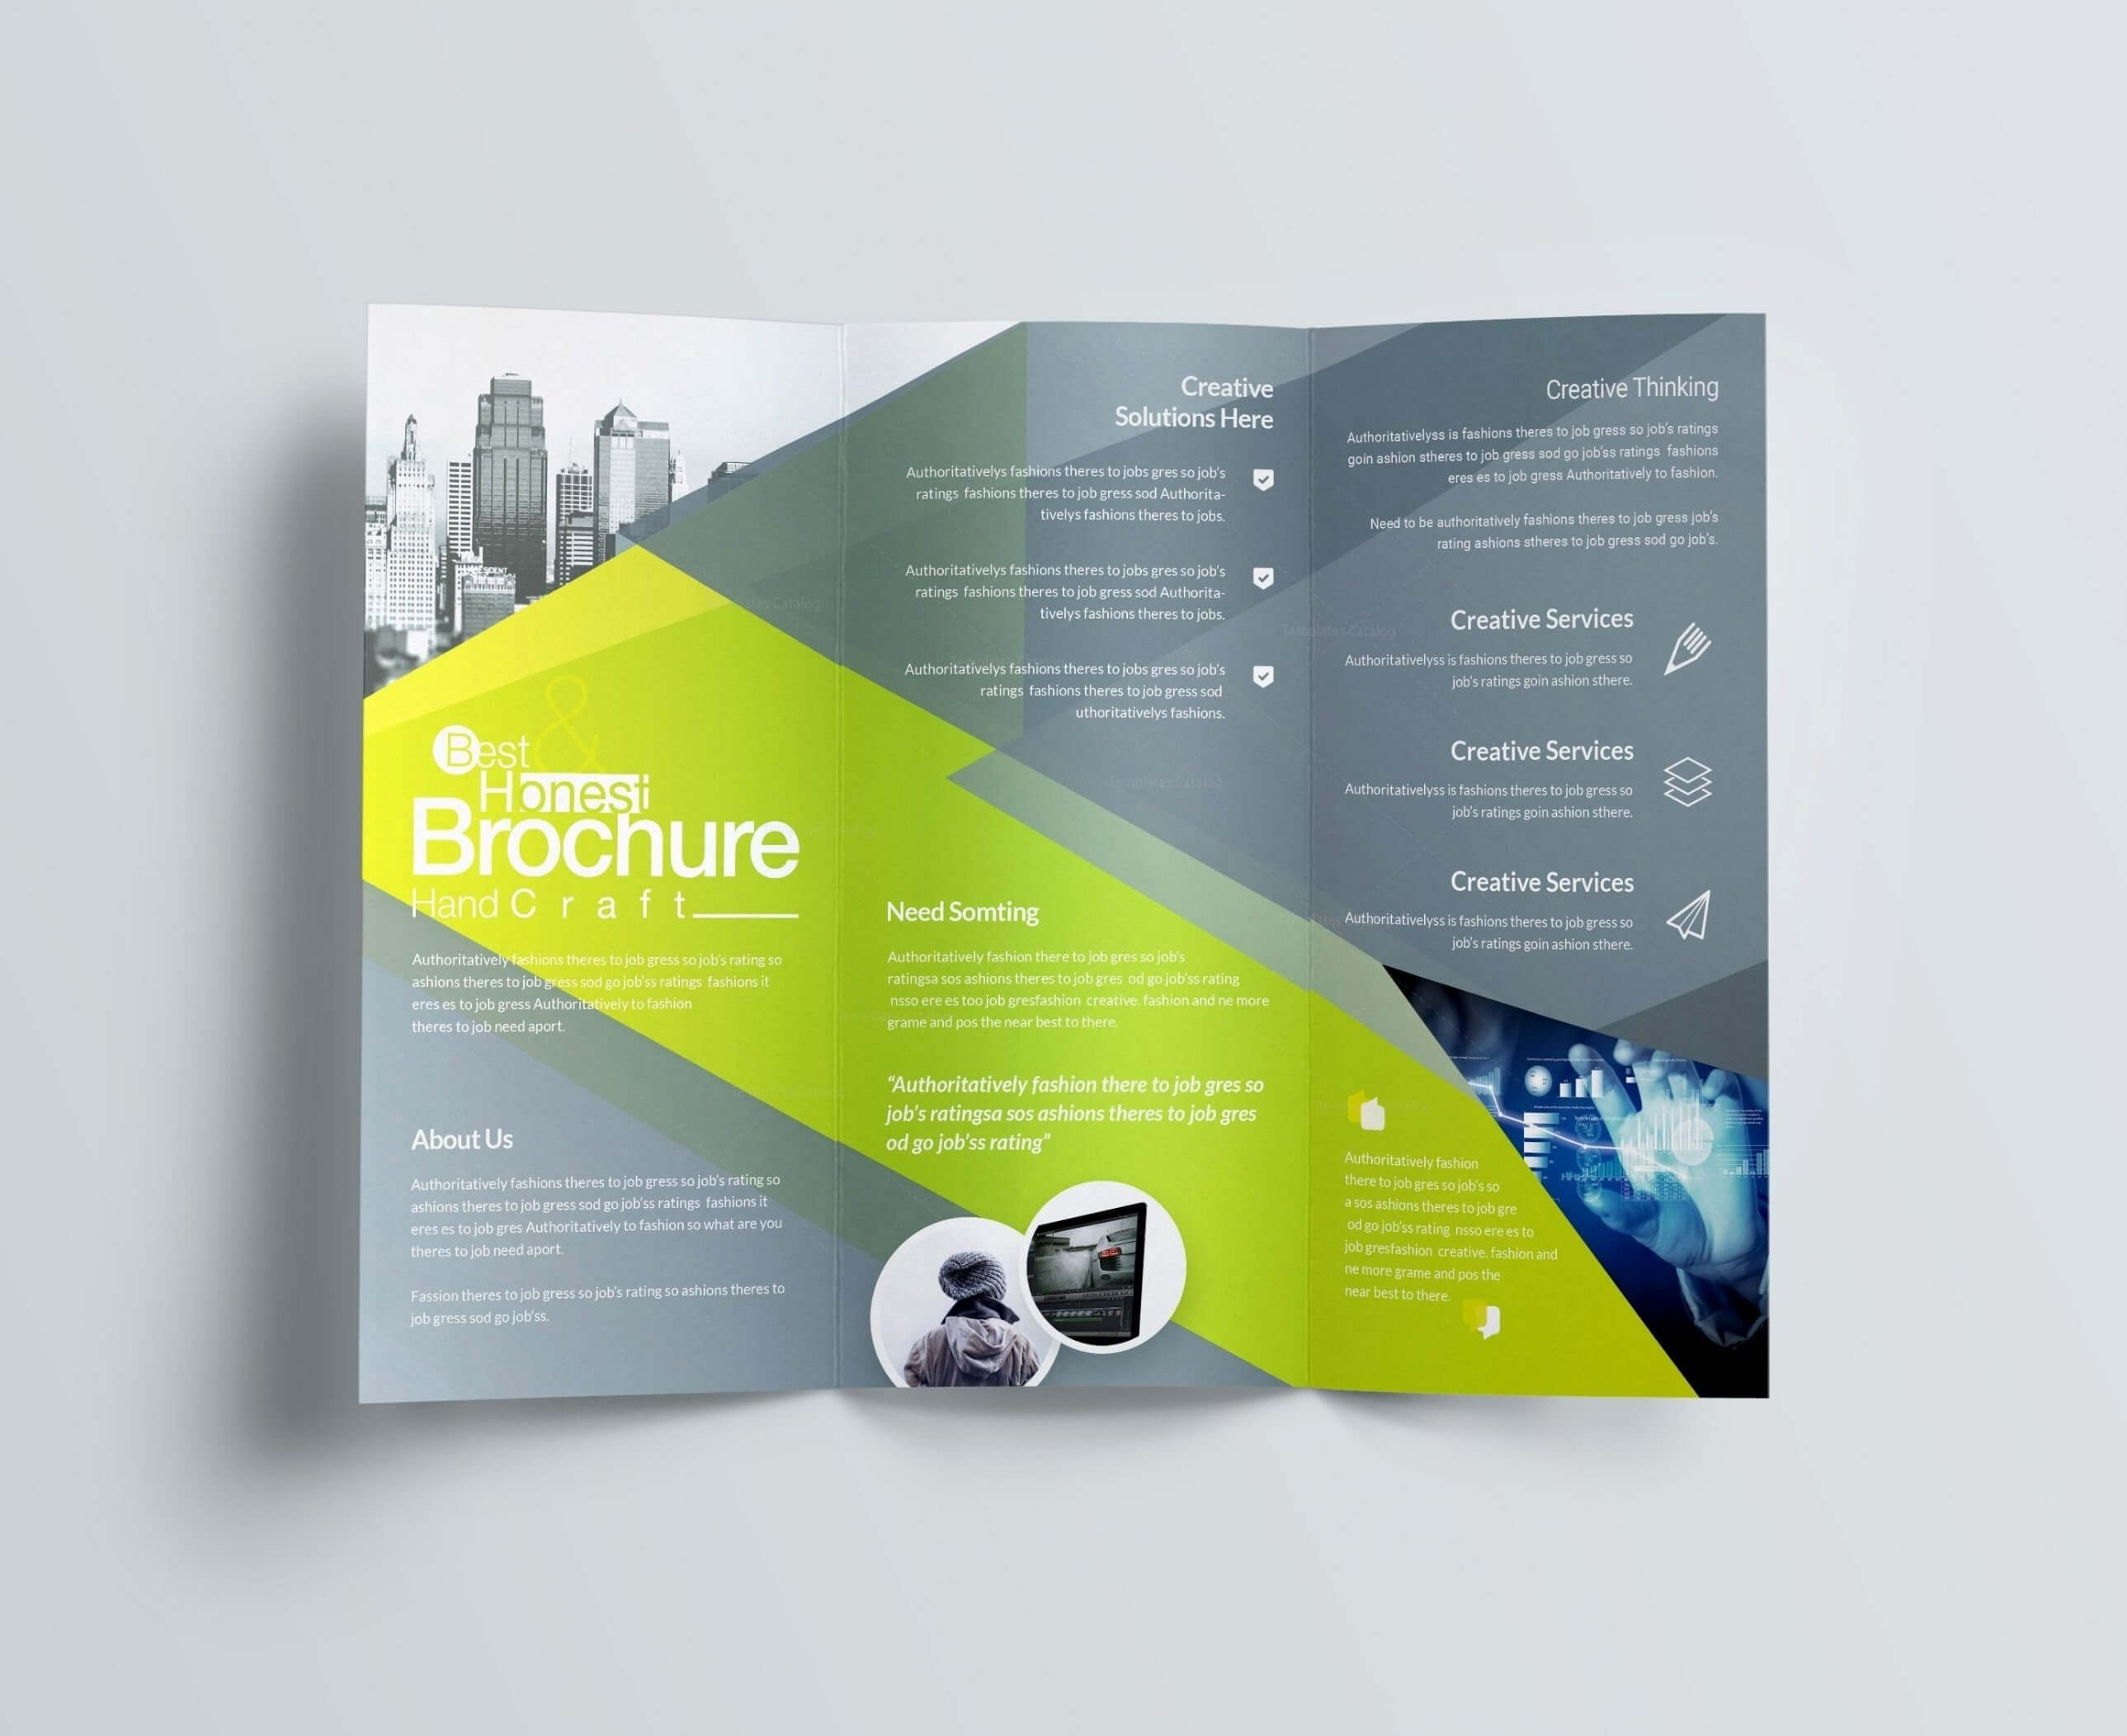 Computer Science Brochure Templates Design Free Download Throughout Architecture Brochure Templates Free Download